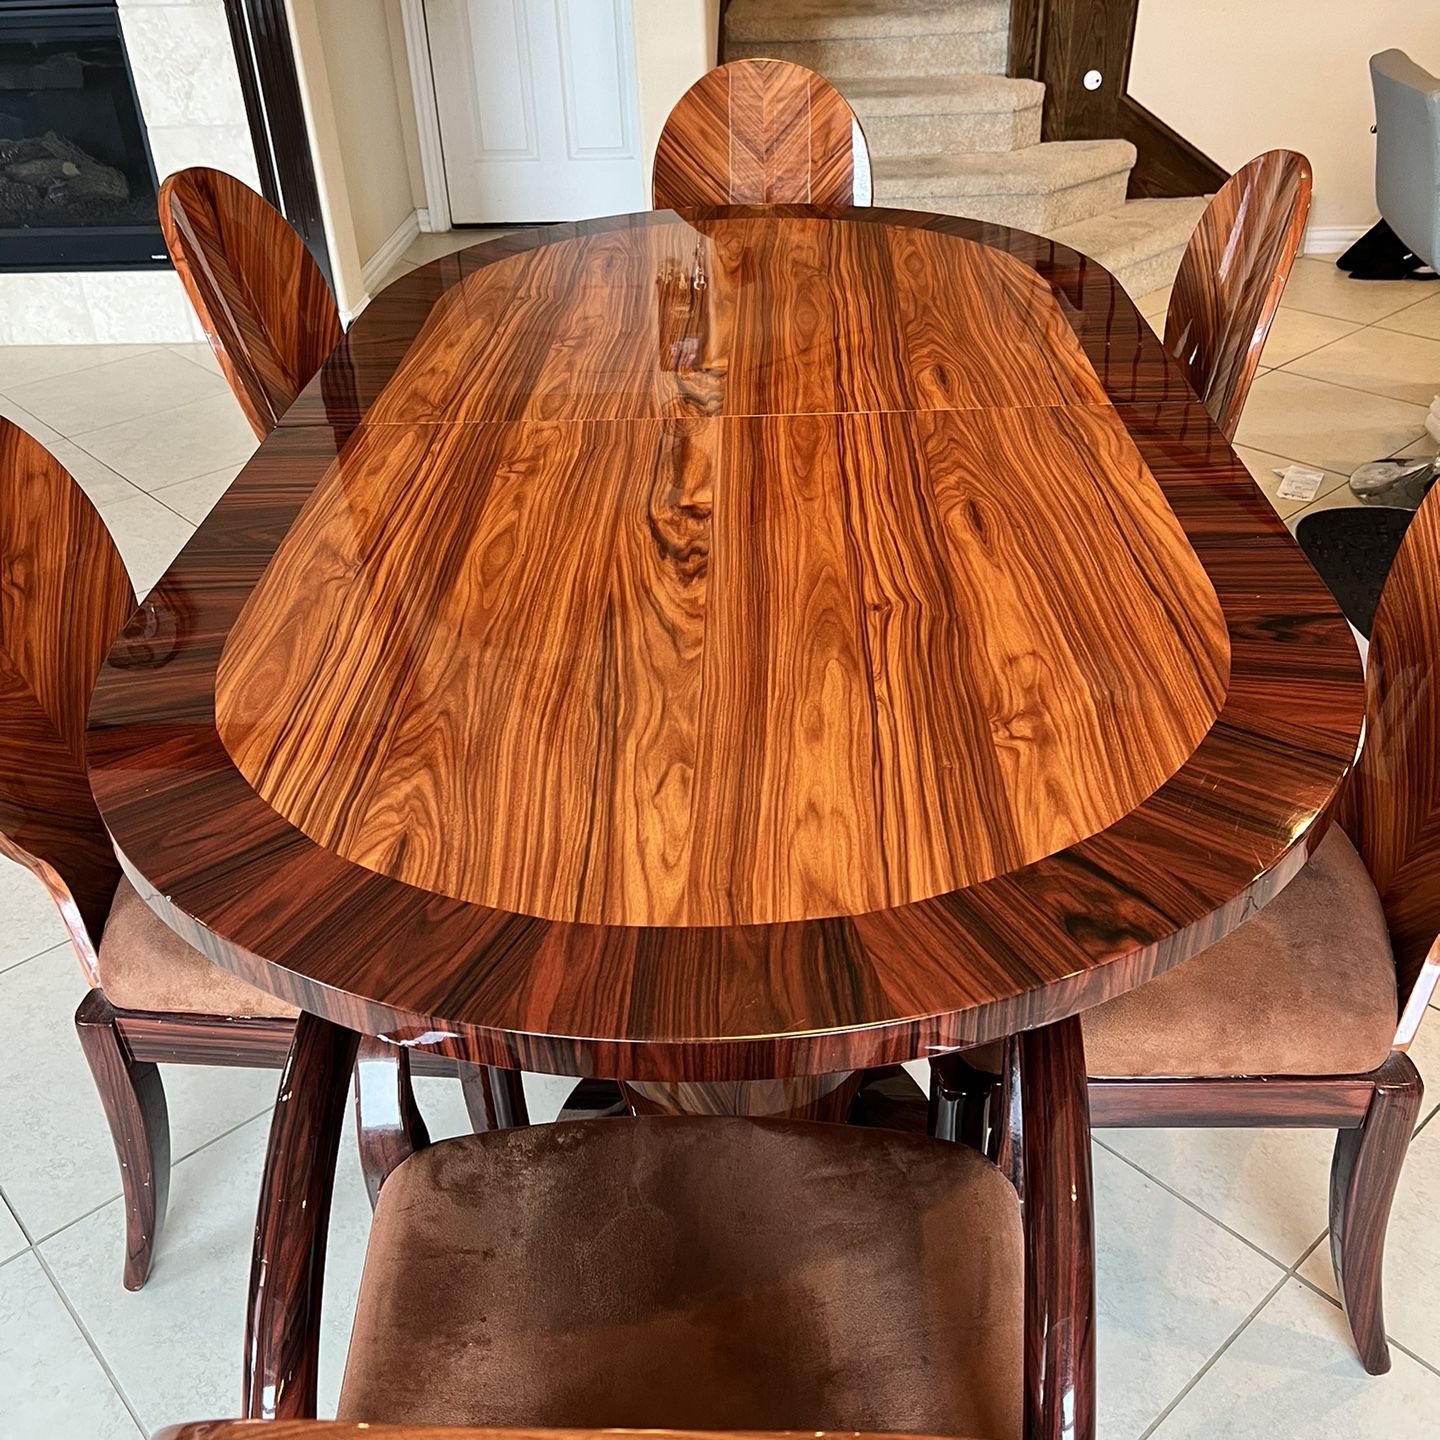 8 Seater Elegant Rosewood Solid Dining Table With 6 Luxury Matching Chairs